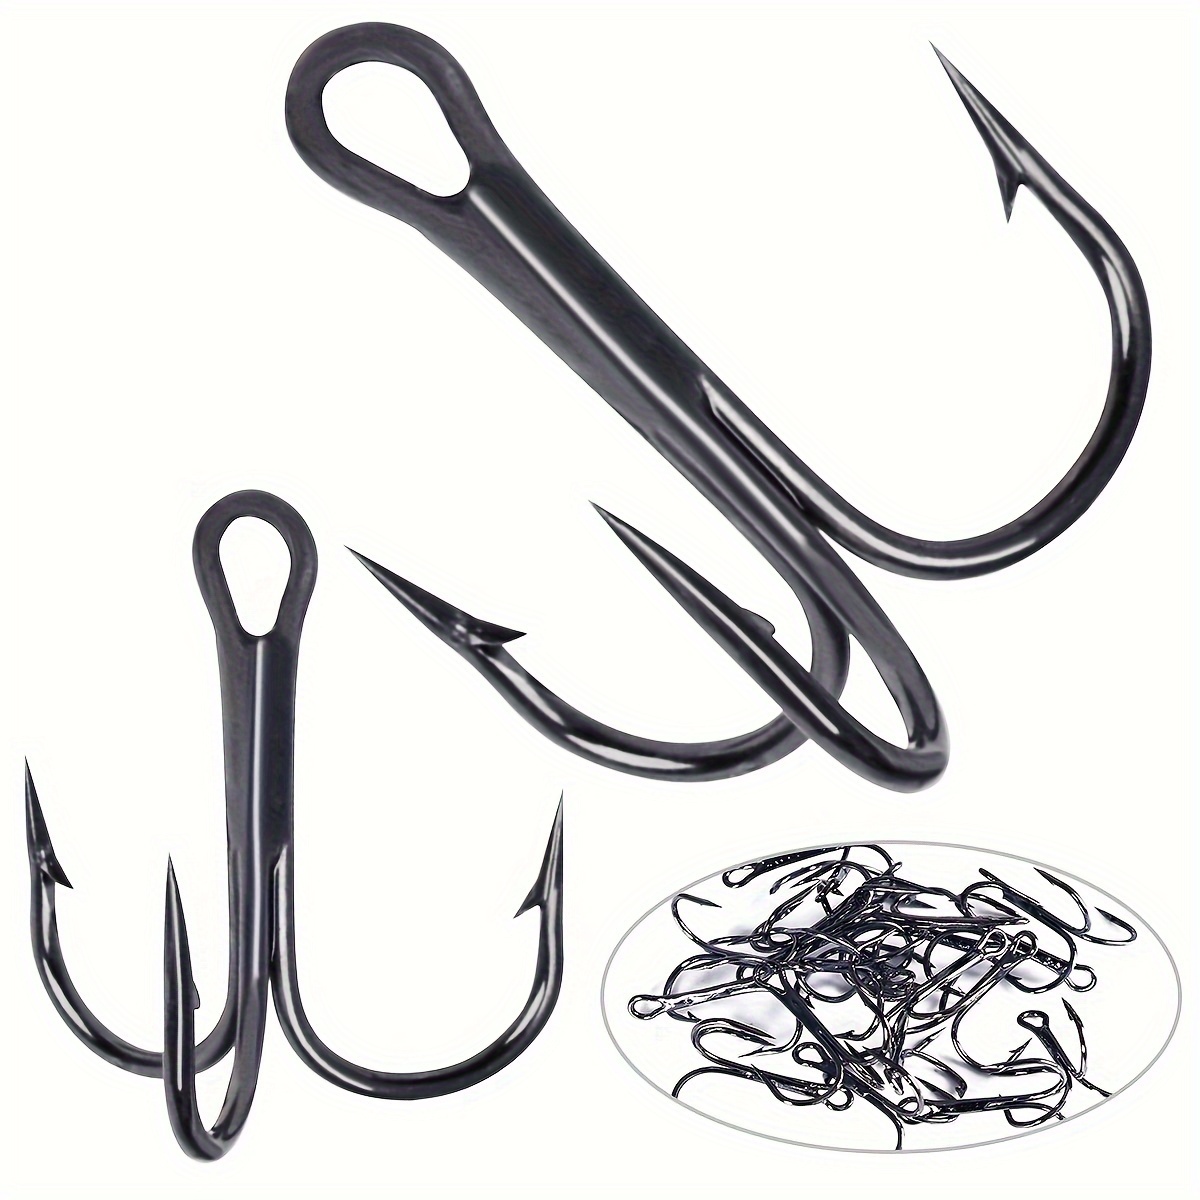 Treble Fishing Hook Strong Round Bend Treble Hooks 100PCS-200PCS Wide Gap  High Carbon Steel Hooks for Lures Baits Size 1/0-14 Black : Sports &  Outdoors 